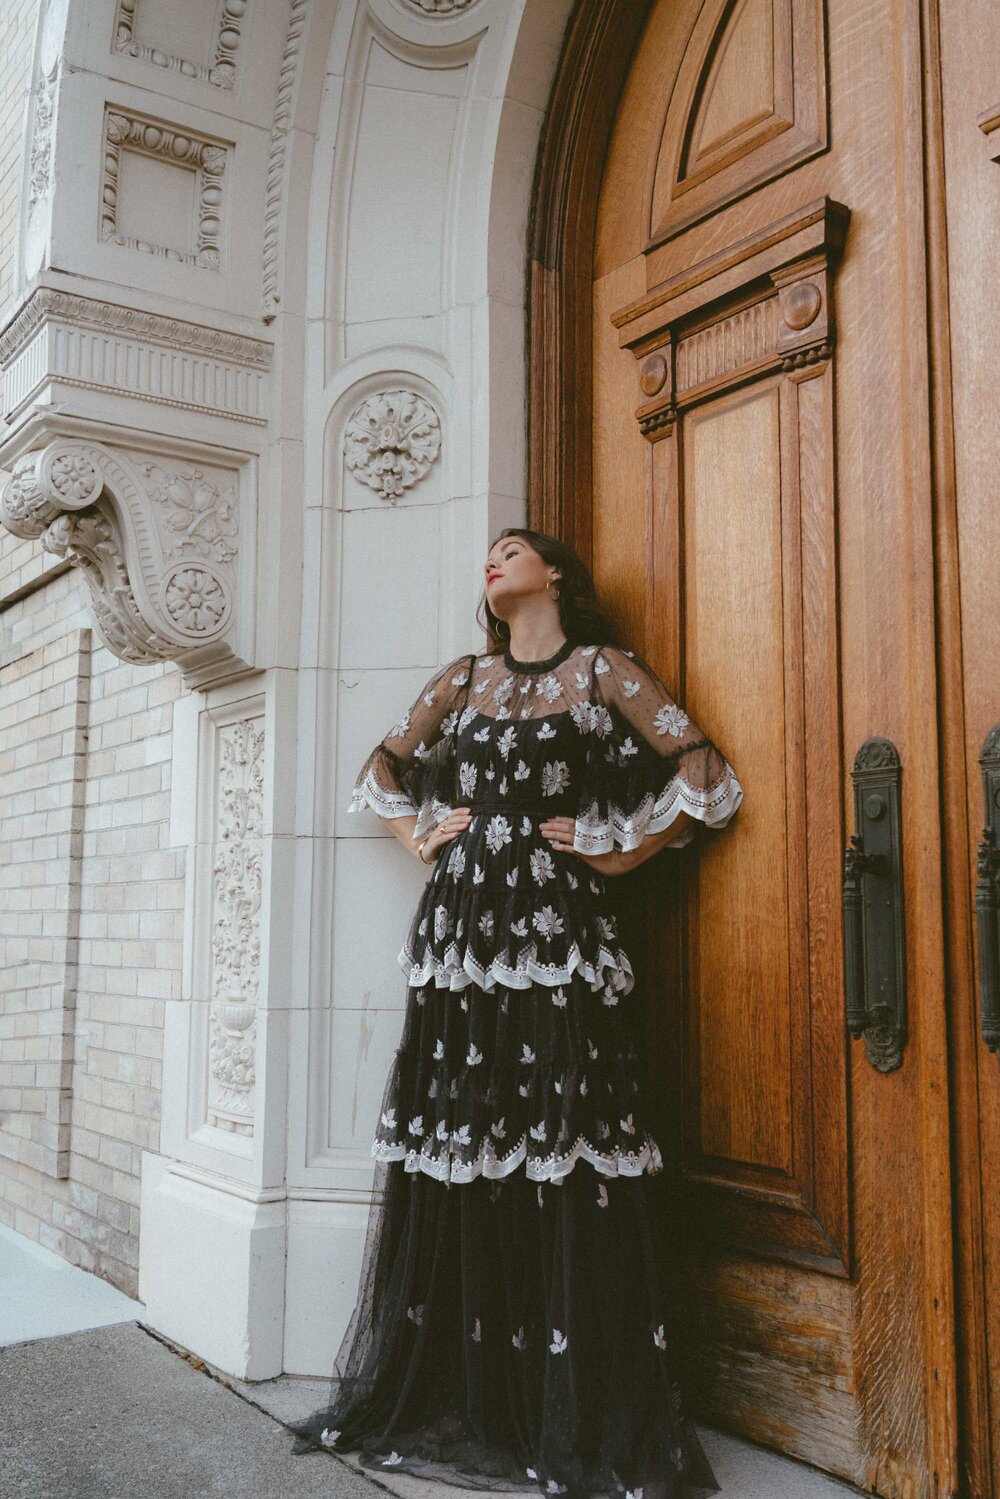 Chic vintage victorian inspired holiday dress. Sarah Butler of @sarahchristine wearing Needle and Thread Amber Petal Gown in Graphite made from sequin-embellished tulle with tiered ruffled trims and a semi-sheer fabrication in Seattle, Washington -7.jpg